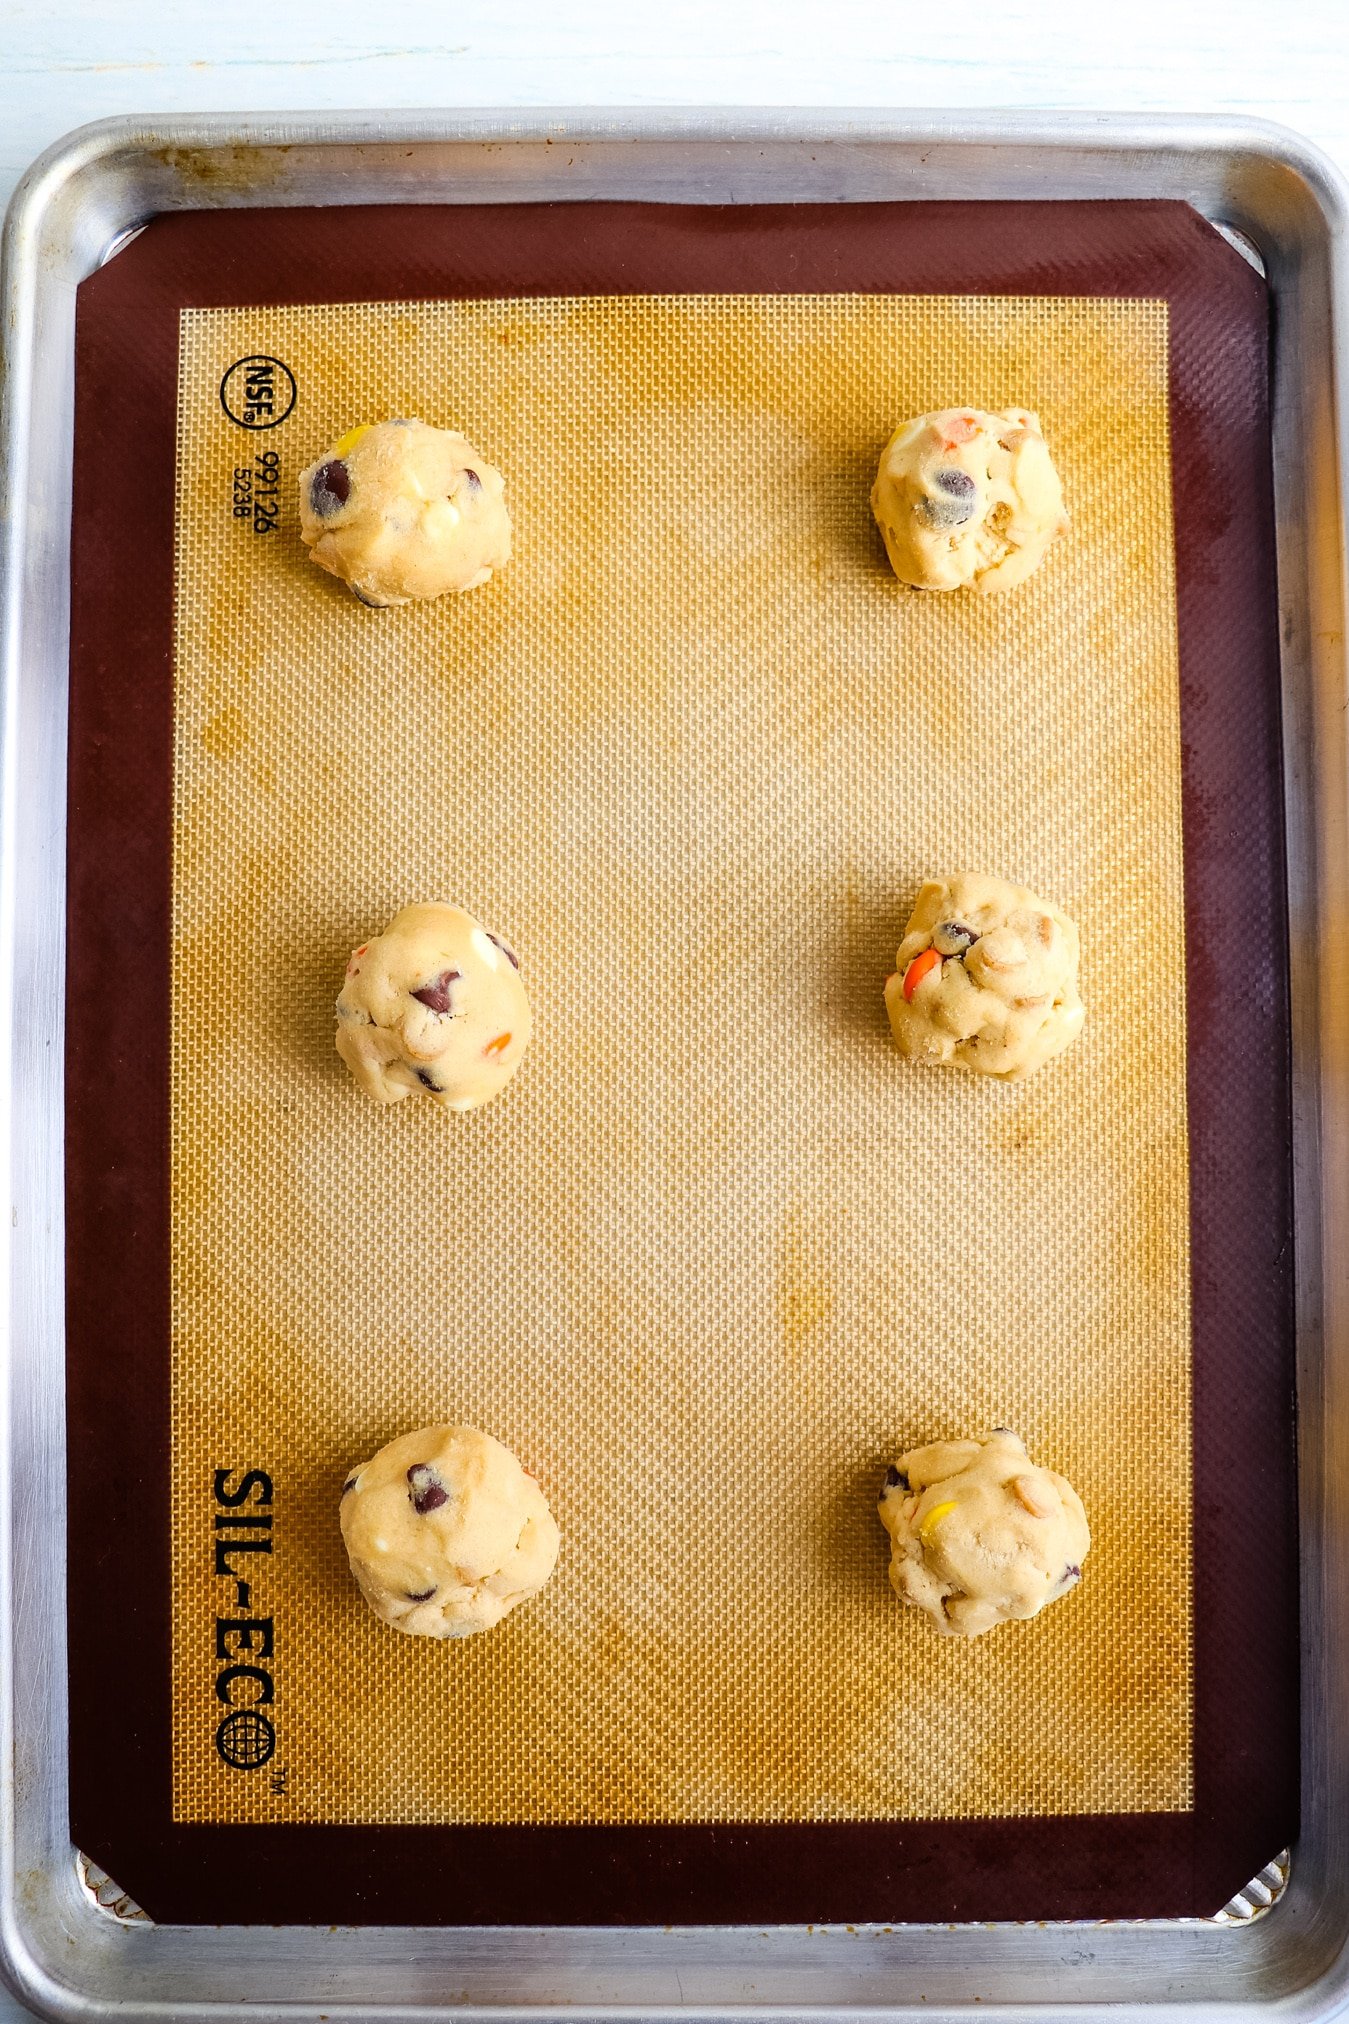 Six Reese's pieces cookies on a baking sheet, unbaked.